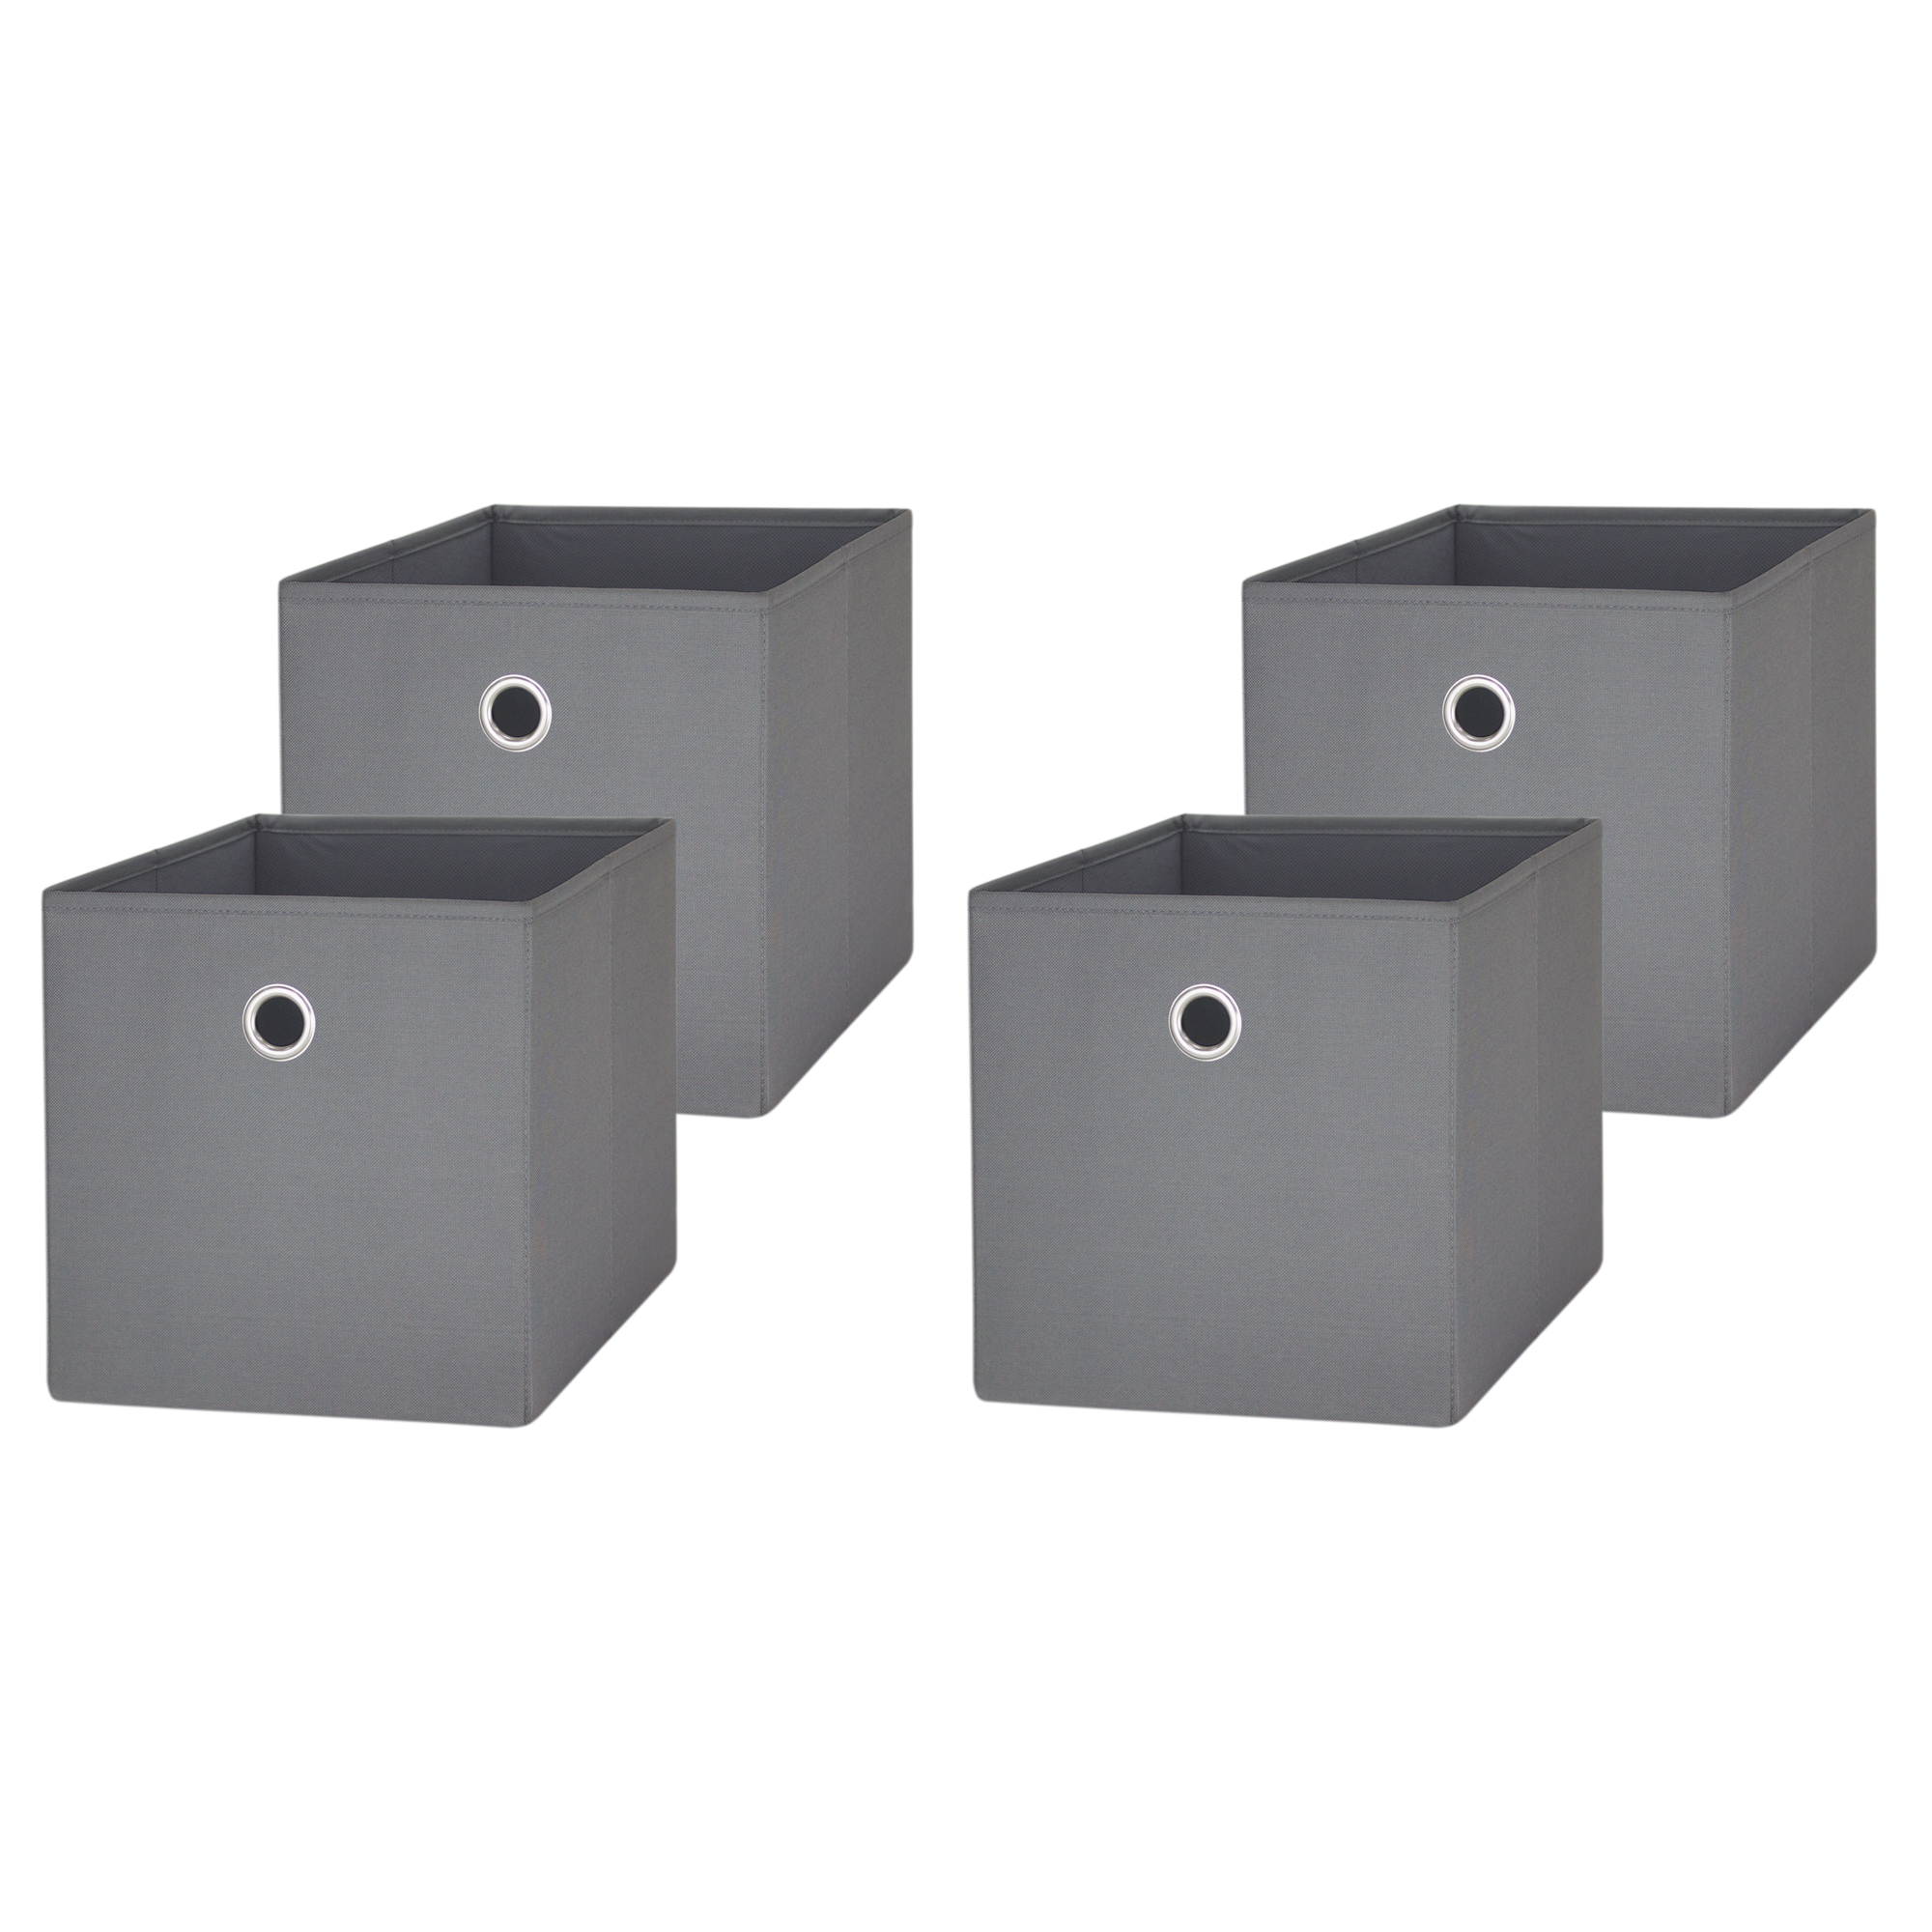 Mainstays Collapsible Fabric Cube Storage Bins (10.5" x 10.5"), 4 pack, Grey Flannel - image 1 of 6